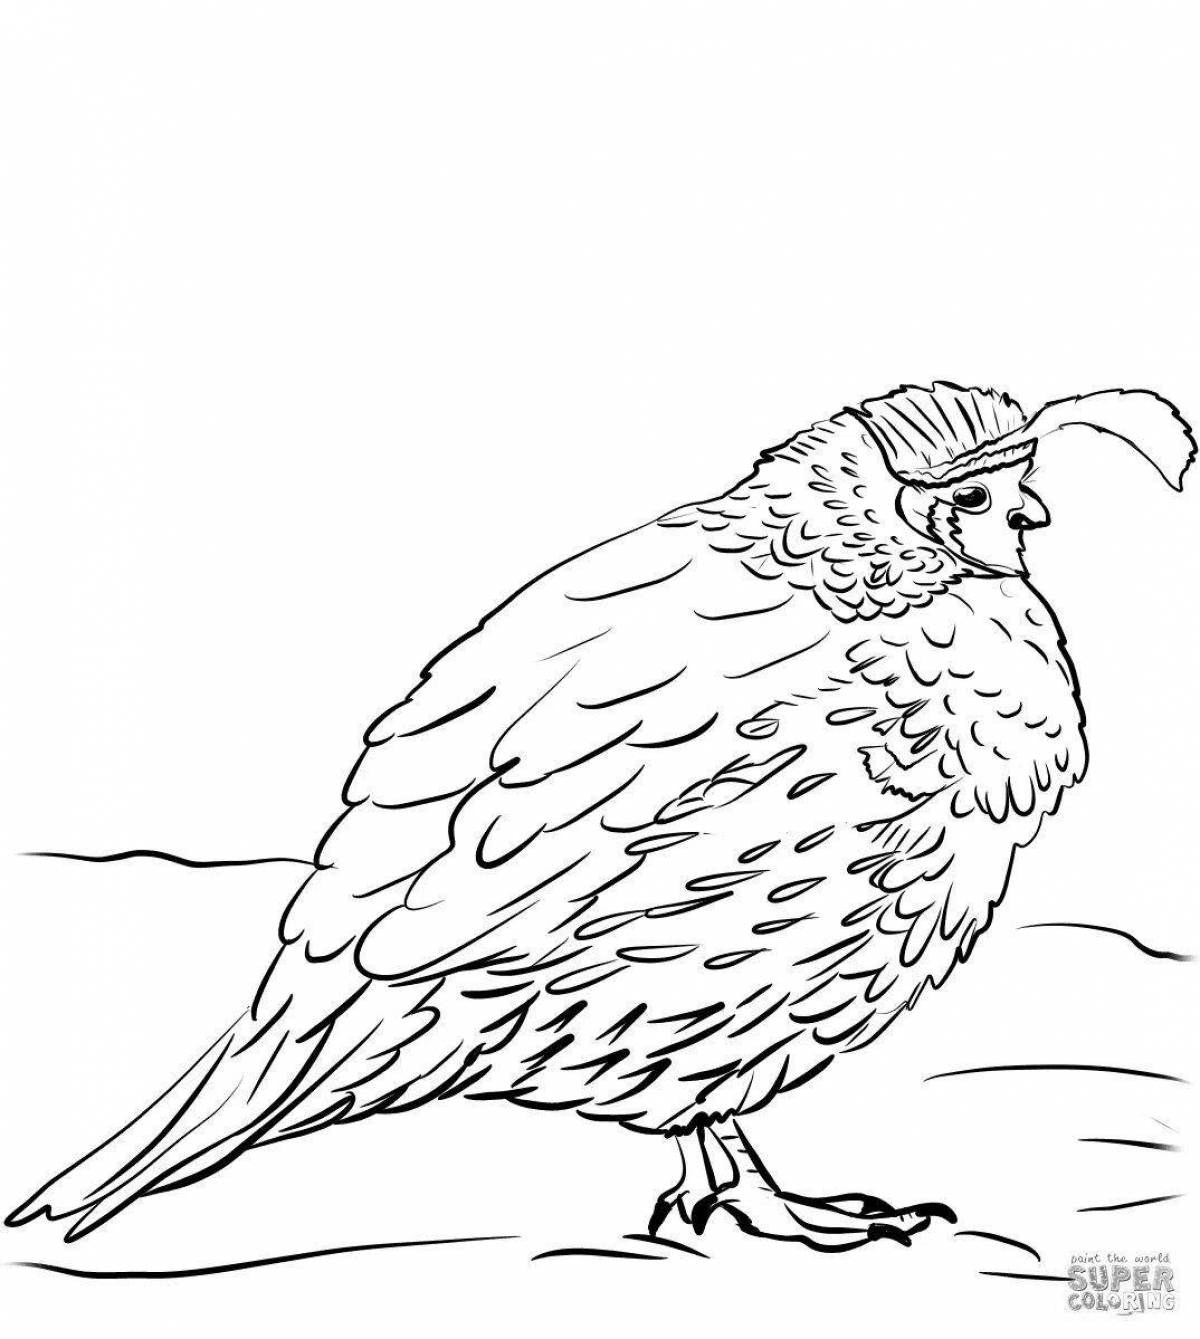 Quail colorful coloring page